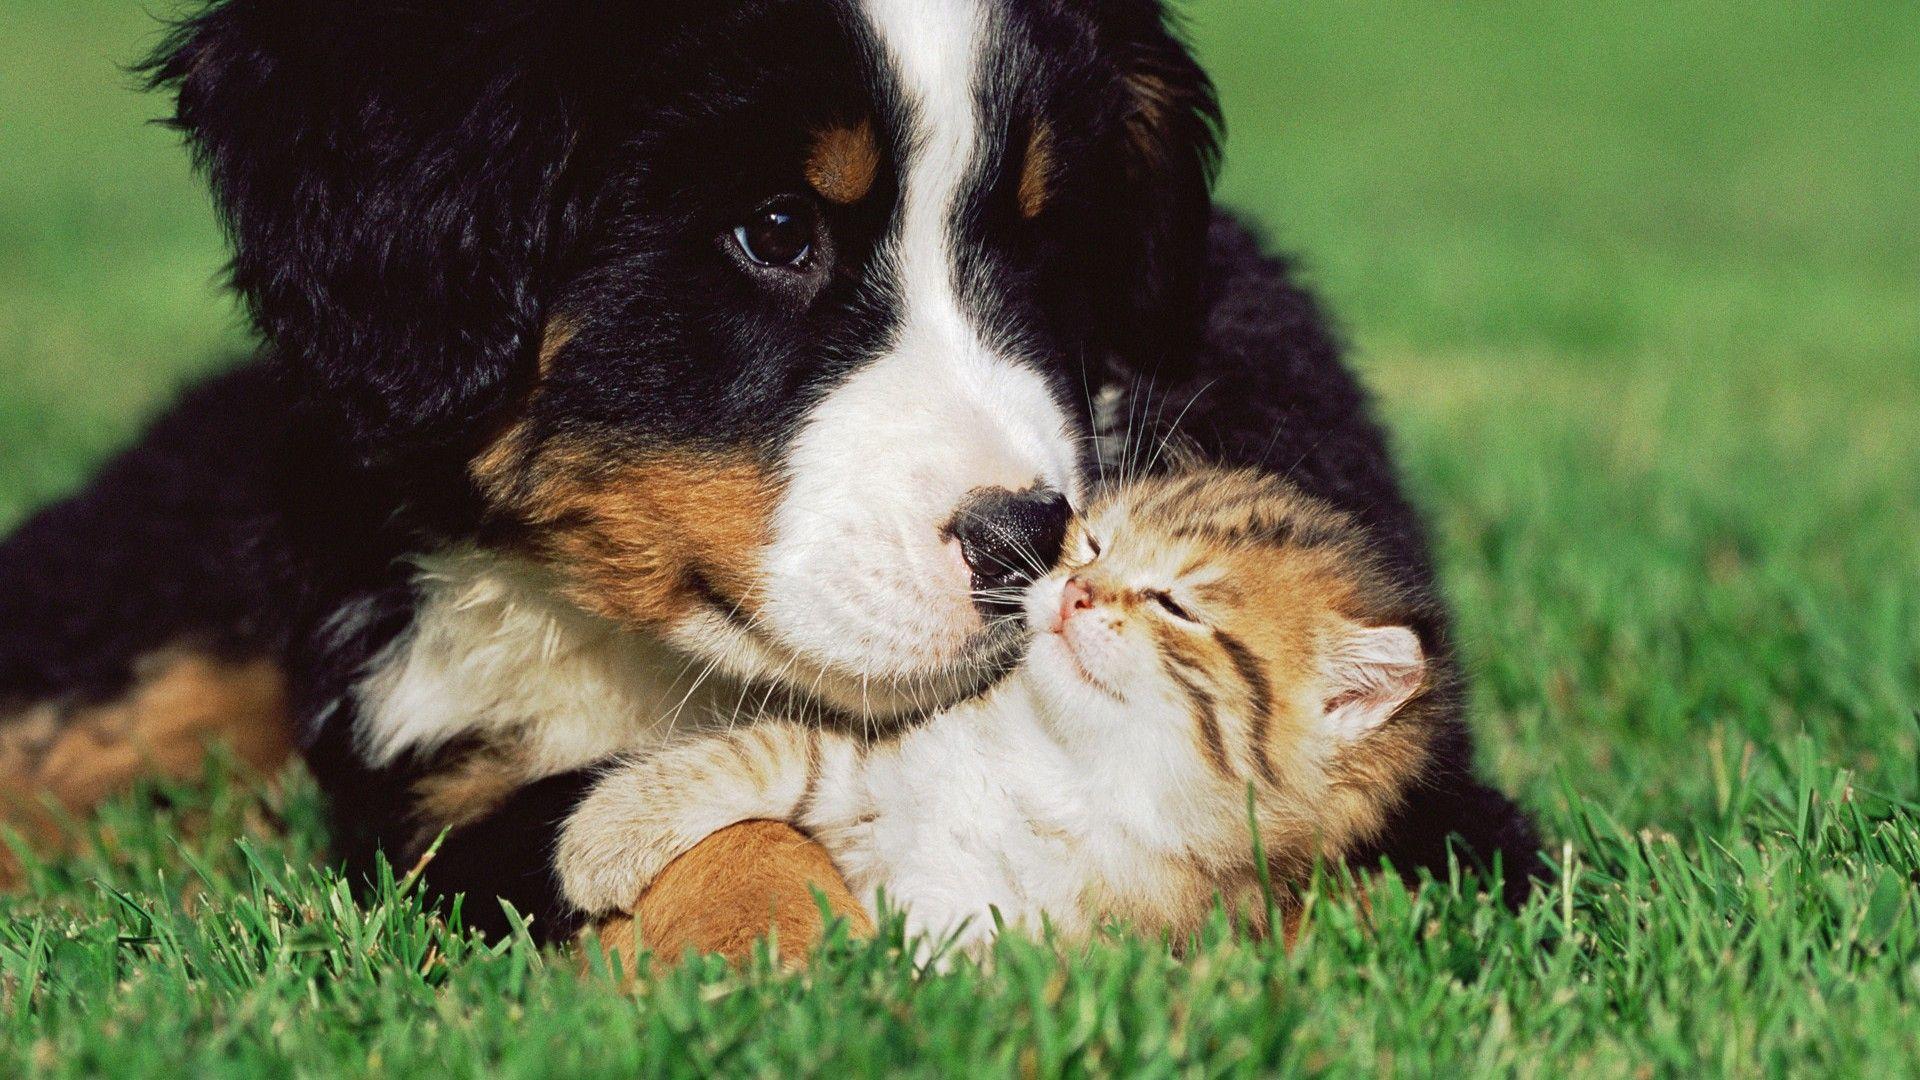 Cute Dogs And Cats Wallpaper High Quality Resolution, Animal